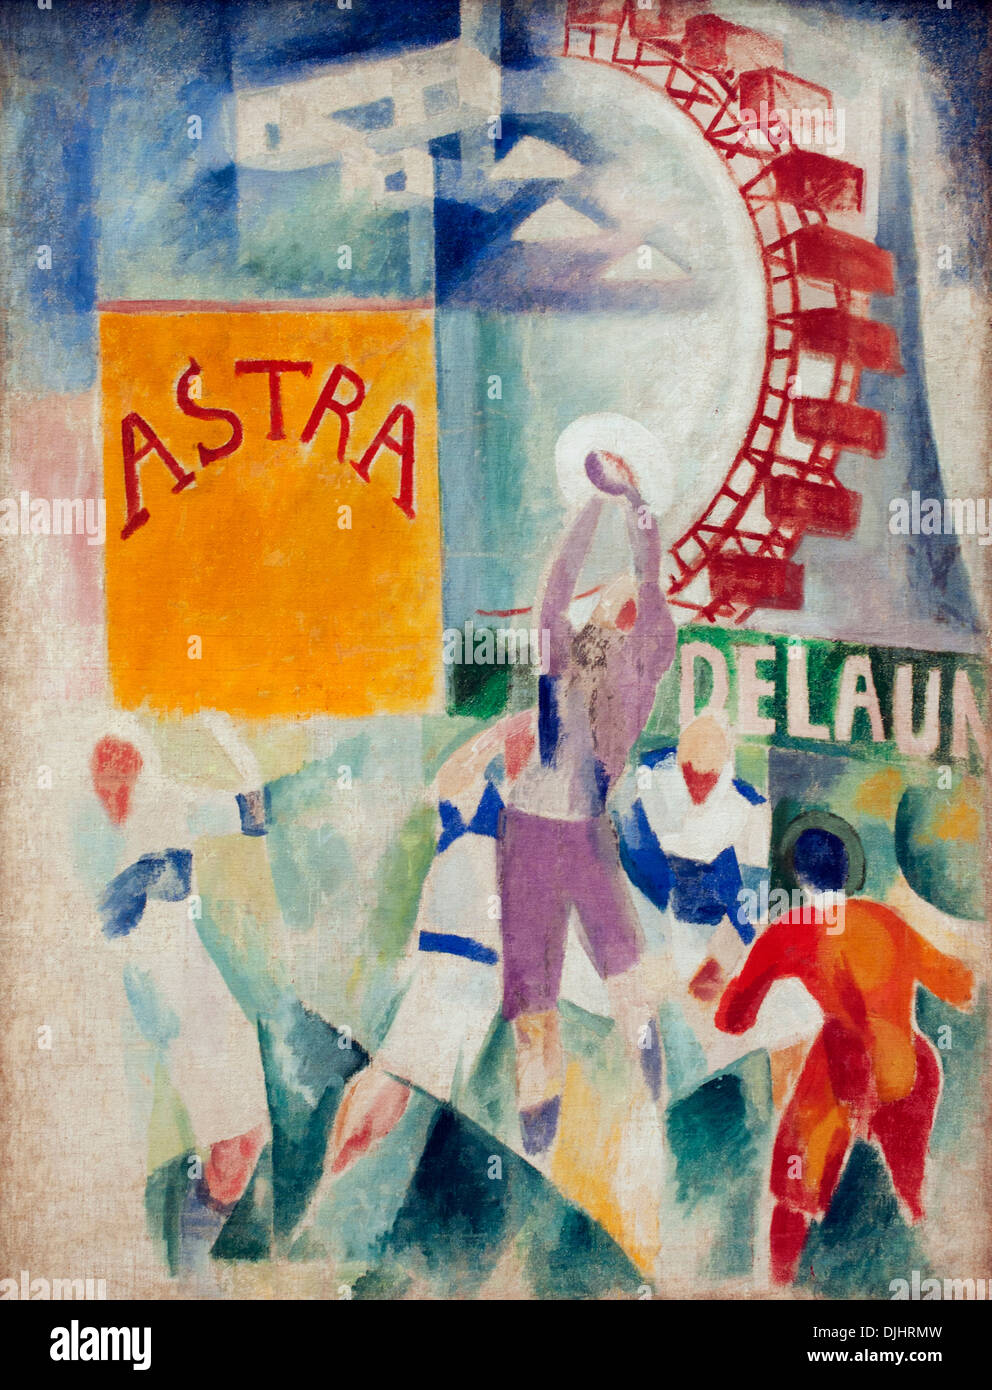 L'EQUIPE DE CARDIFF 1913 ROBERT DELAUNAY (1885-1941) France French Stock Photo